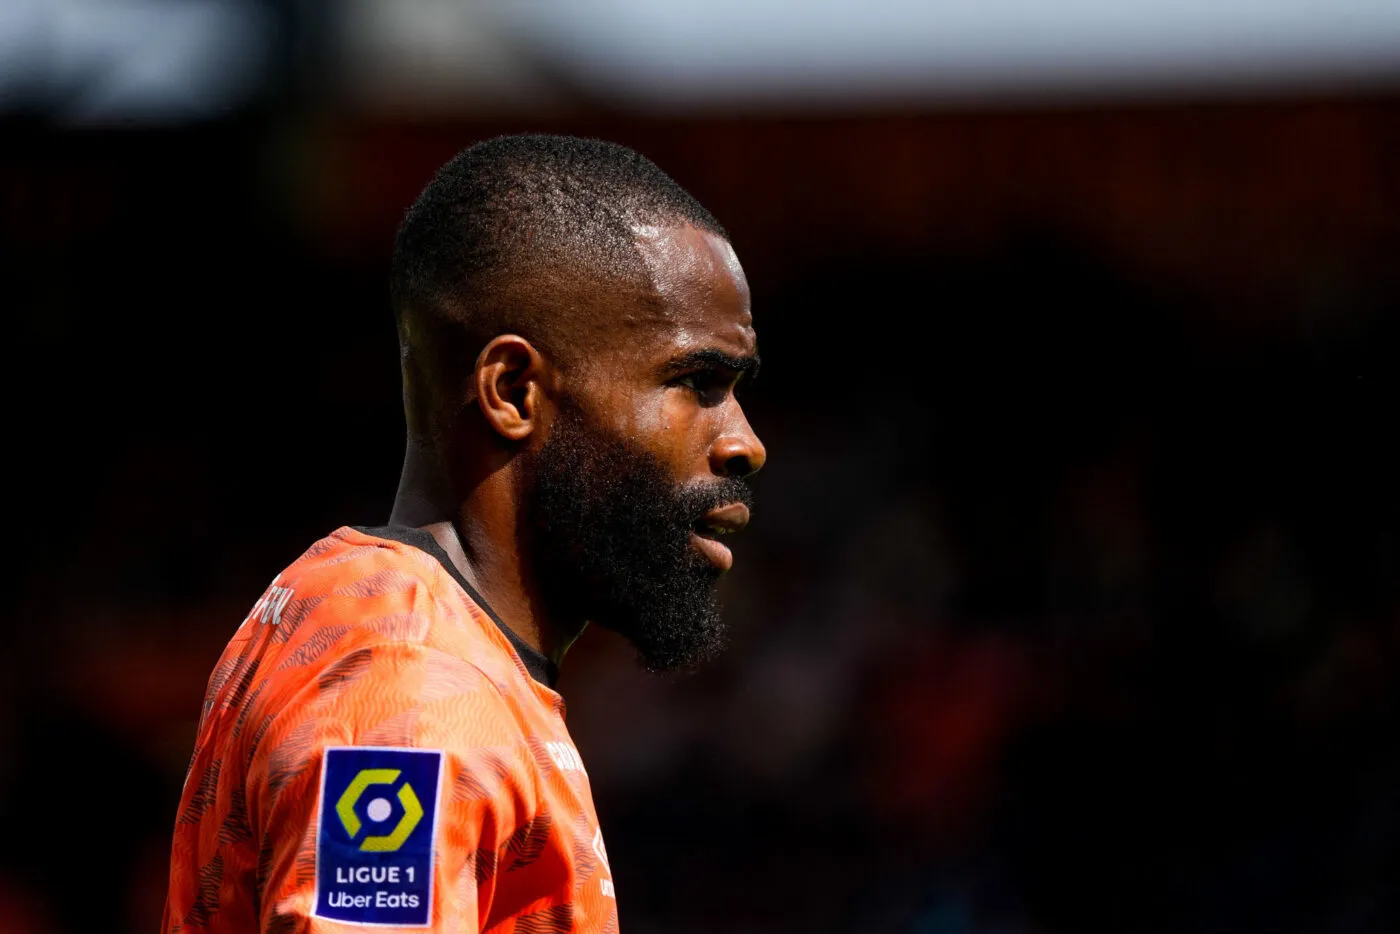 Gedeon KALULU of FC Lorient during the Ligue 1 Uber Eats match between Lorient and Brest on May 7, 2023 in Lorient, France. (Photo by Hugo Pfeiffer/Icon Sport)